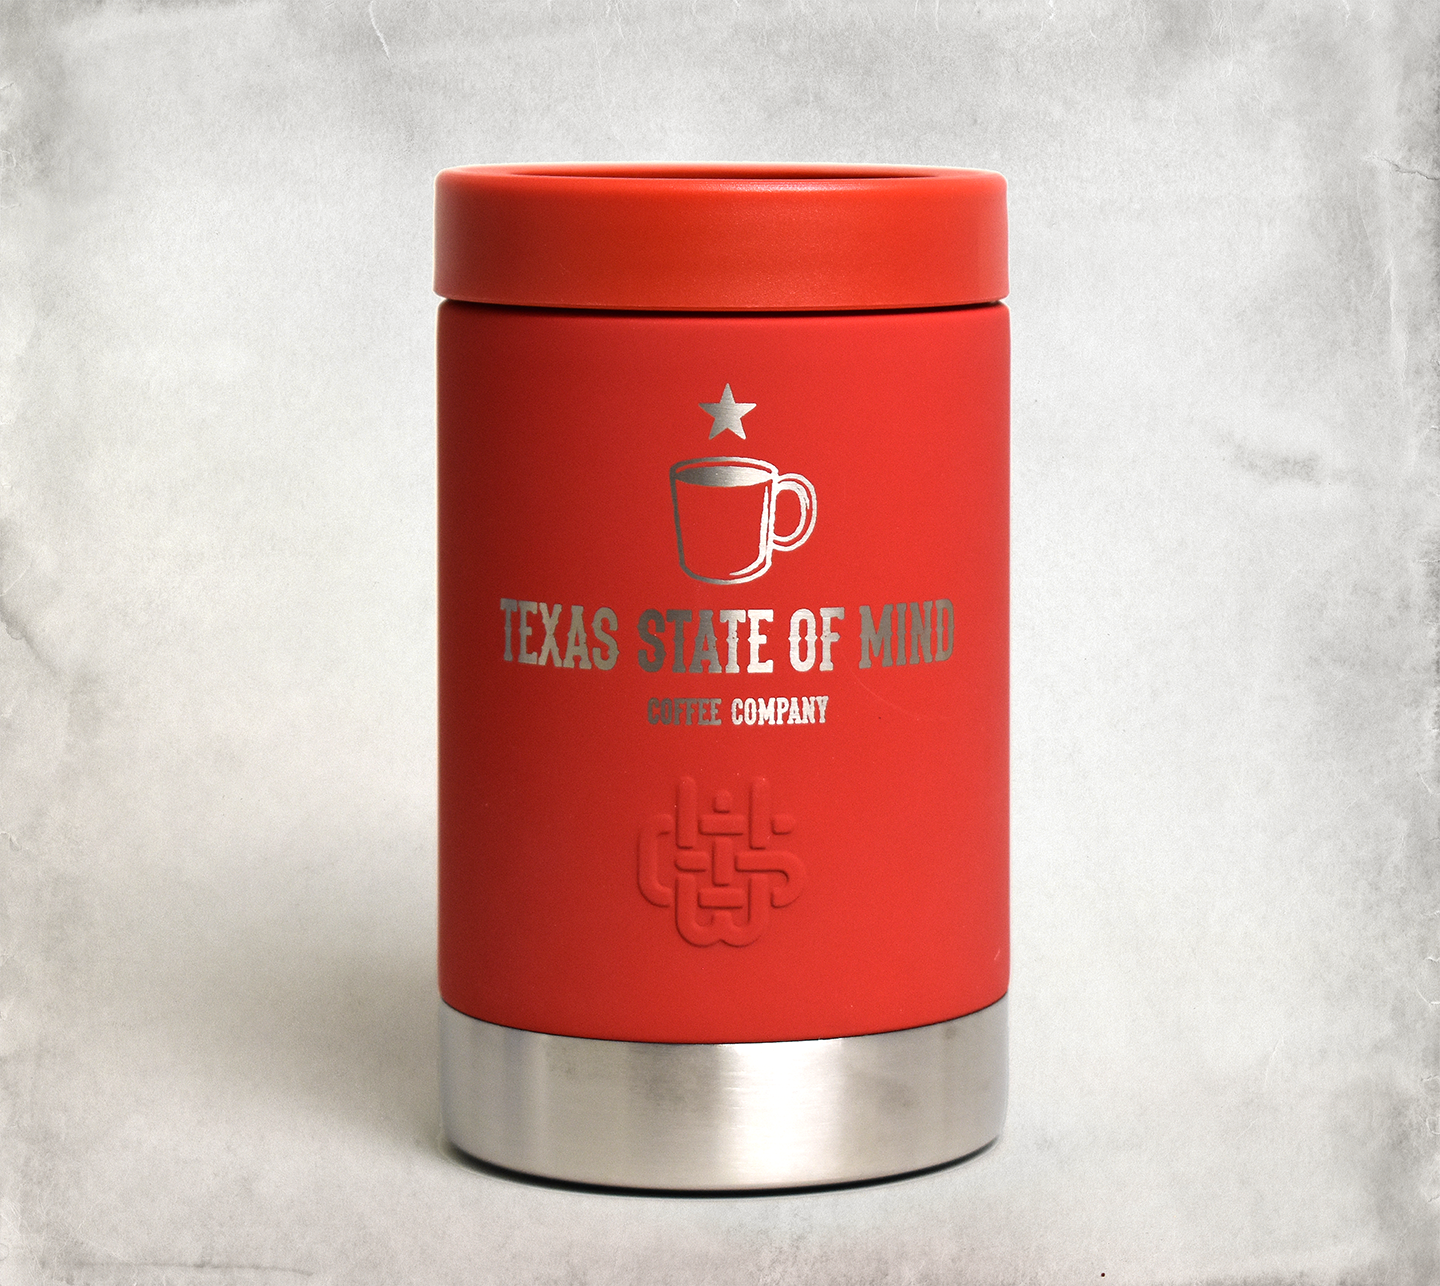 Wholesale Distributor for PP Cold Cups & Lids - Texas Specialty Beverage